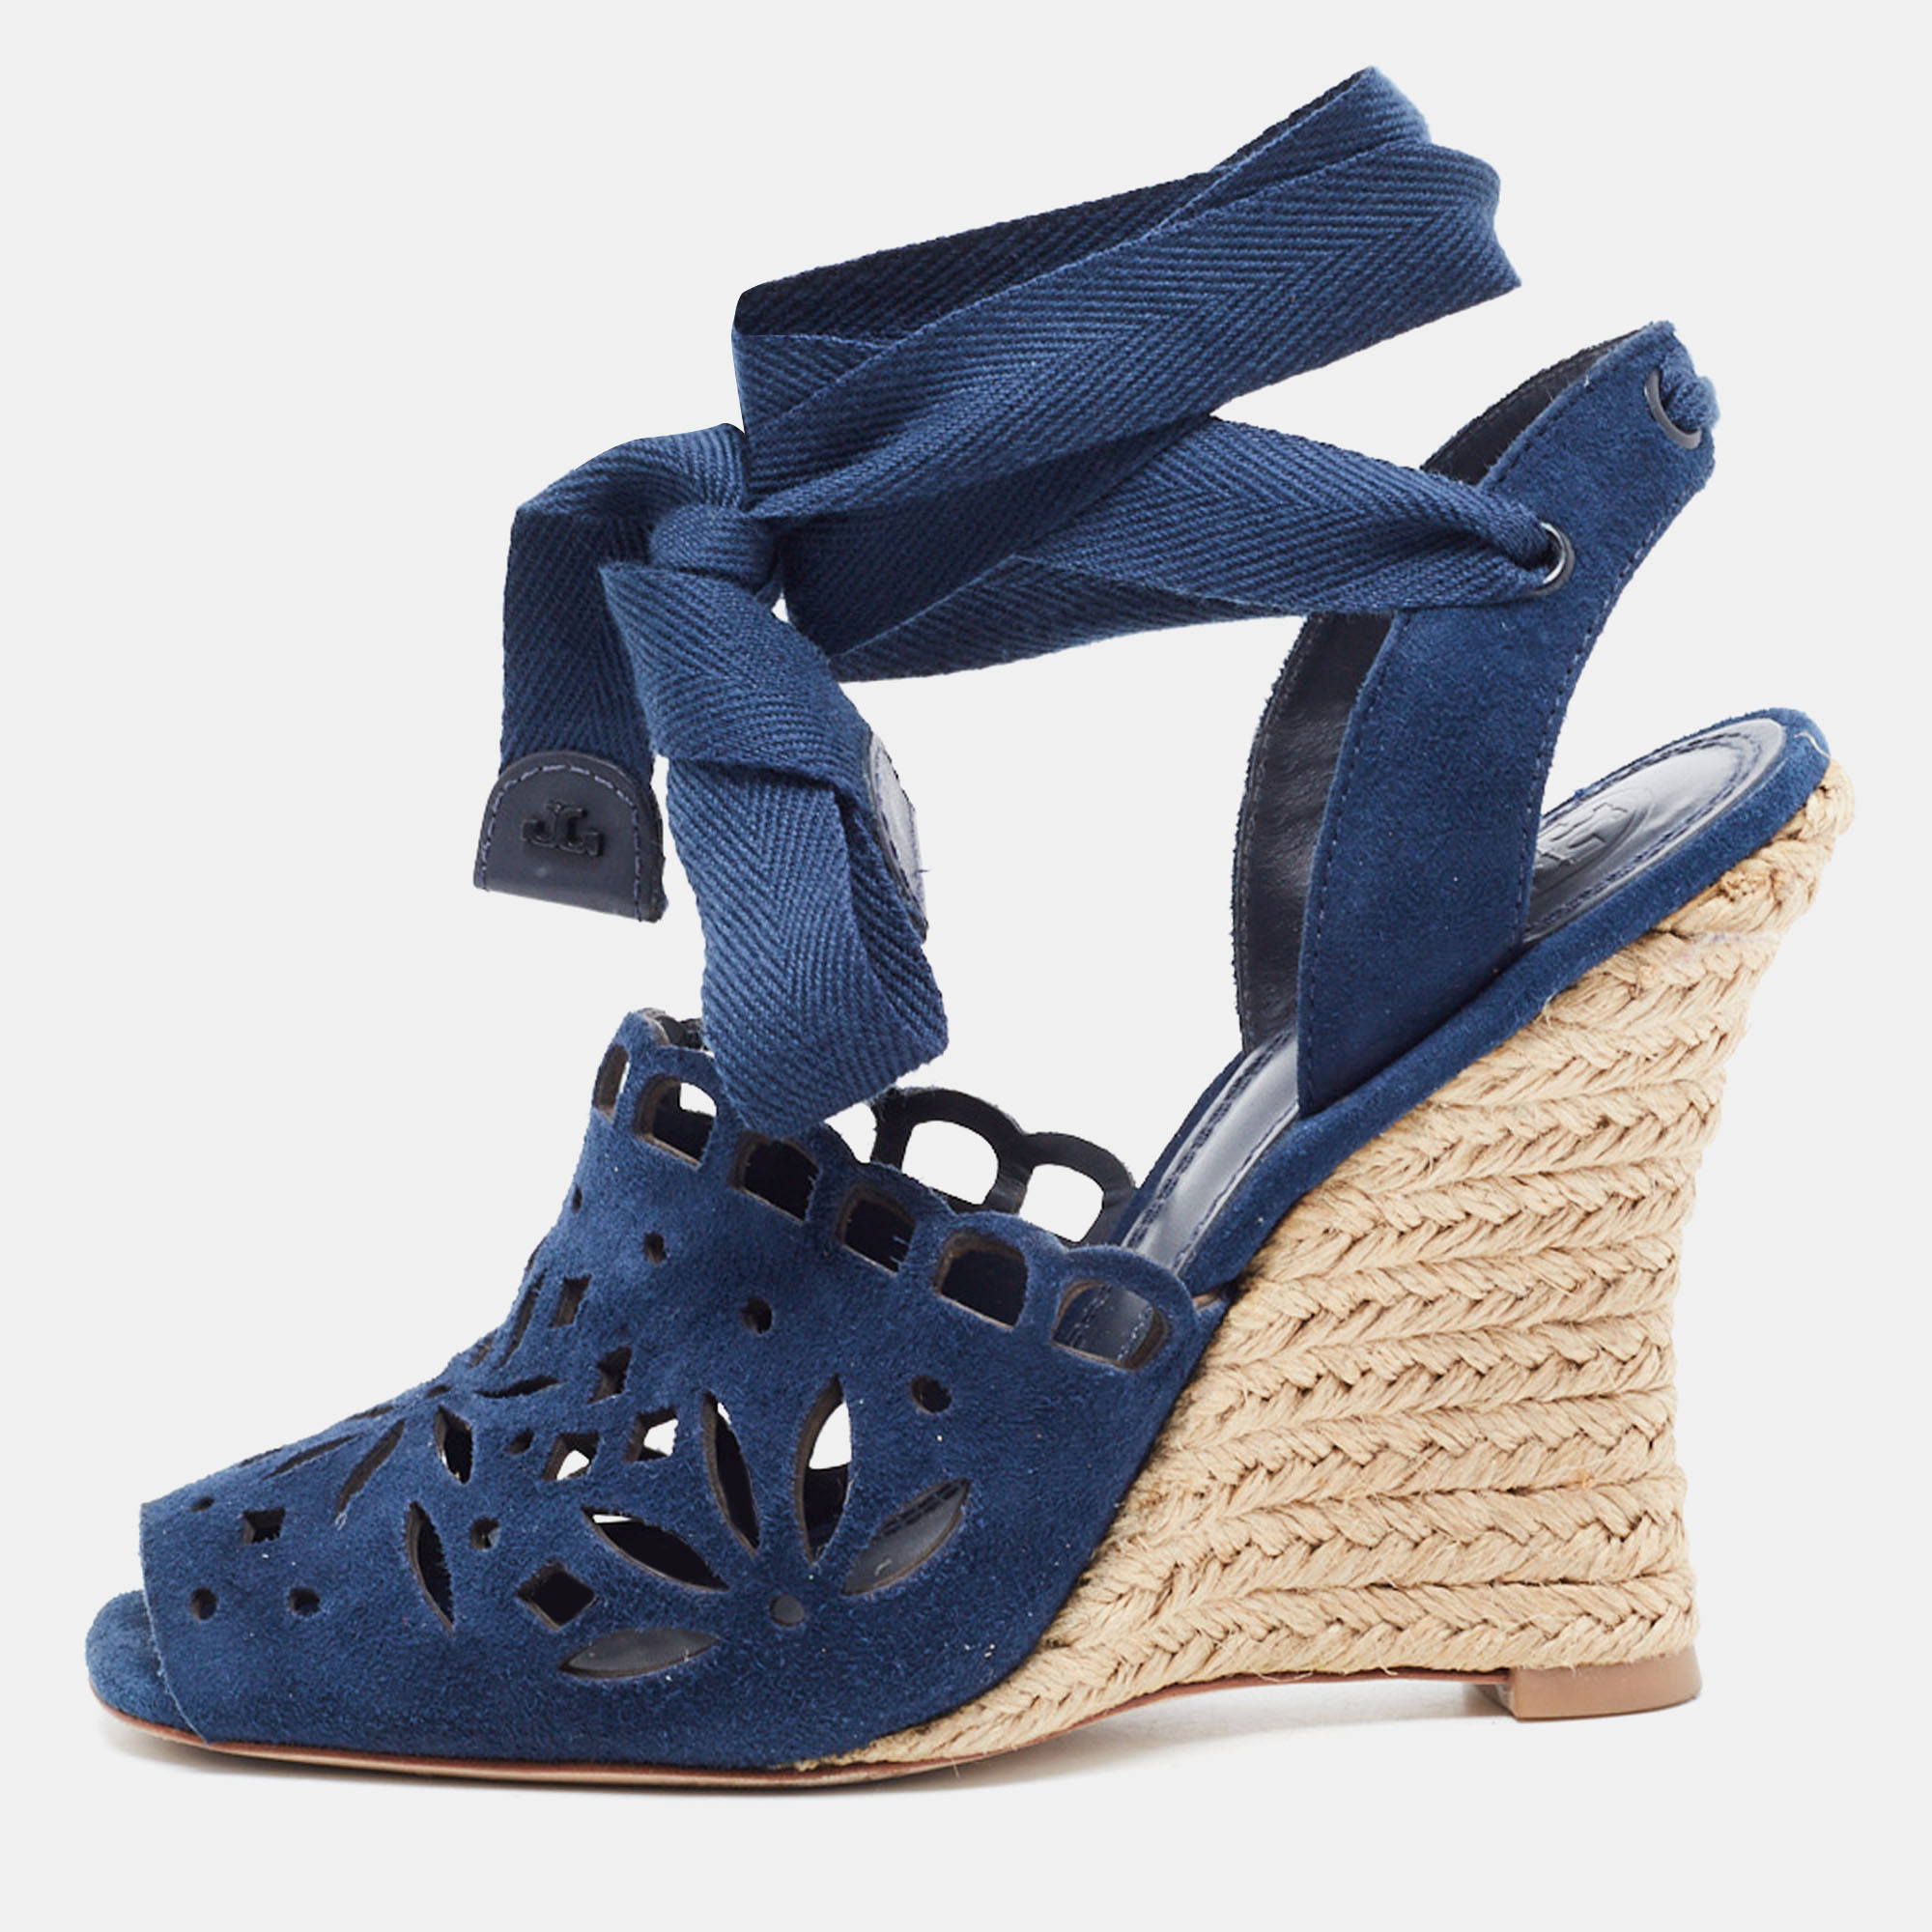 Tory Burch Navy Blue Laser Cut Suede Ankle Tie Wedge Sandals Size 36.5